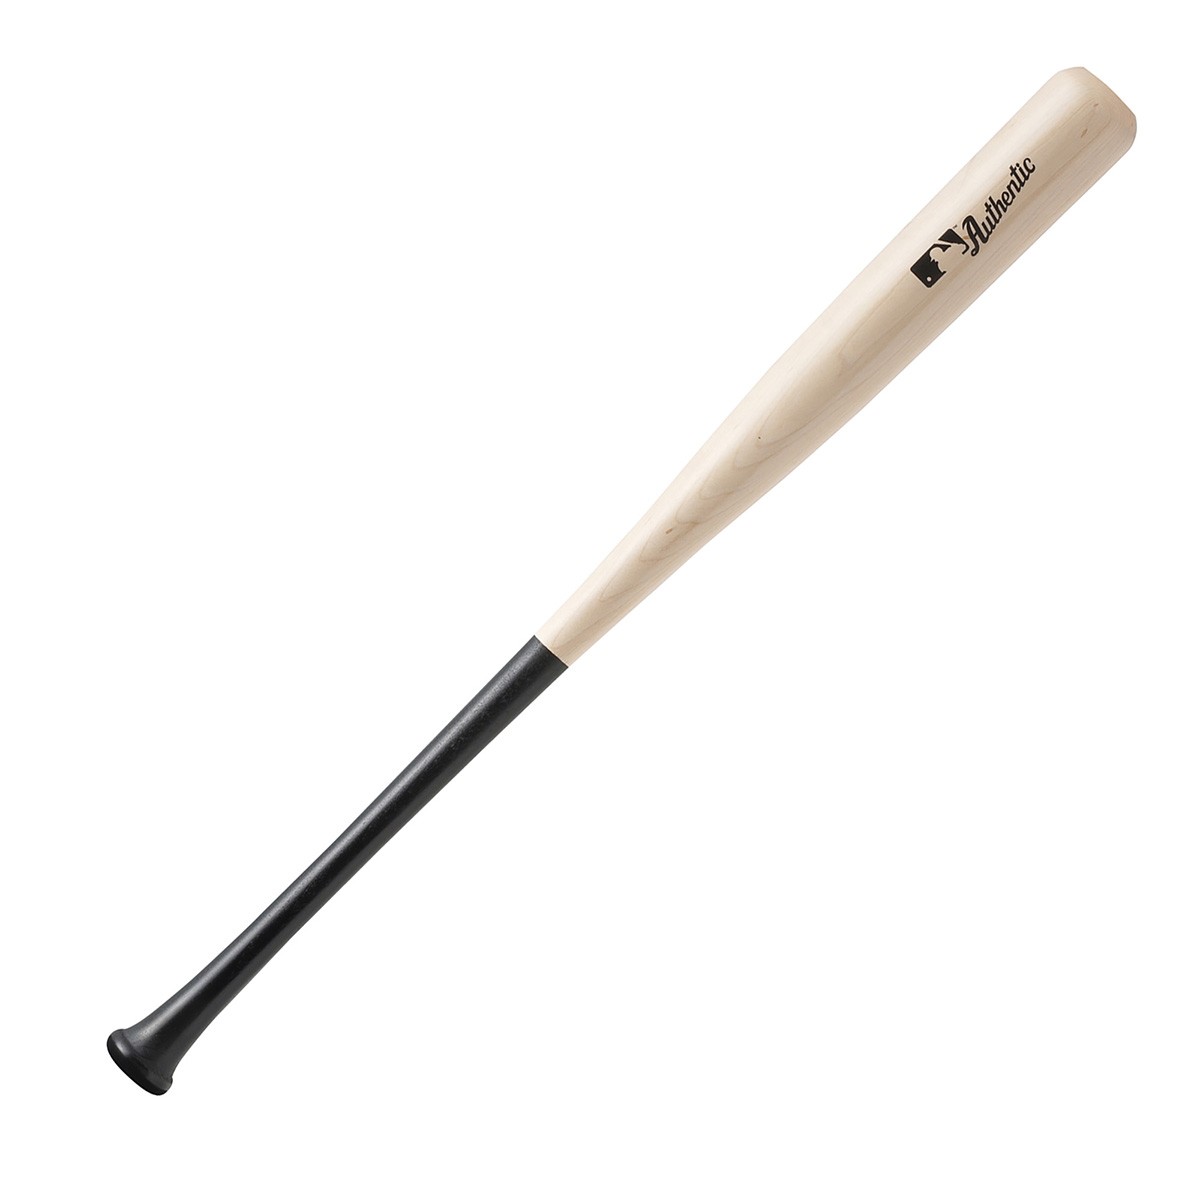 Baseball's biggest hitters choose maple for its harder hitting surface and greater durability. The Hard Maple series is pulled from their original production line for some minor flaw that will not affect the bat's performance. These small production errors mean deep savings on superior bats ideal for practice, batting cages or even games. PERFORMANCE GRADE Wood: Hard Maple Finish: Black HandleNatural Barrel Turning Model: I13 Barrel Diameter Large Barrel Material Maple